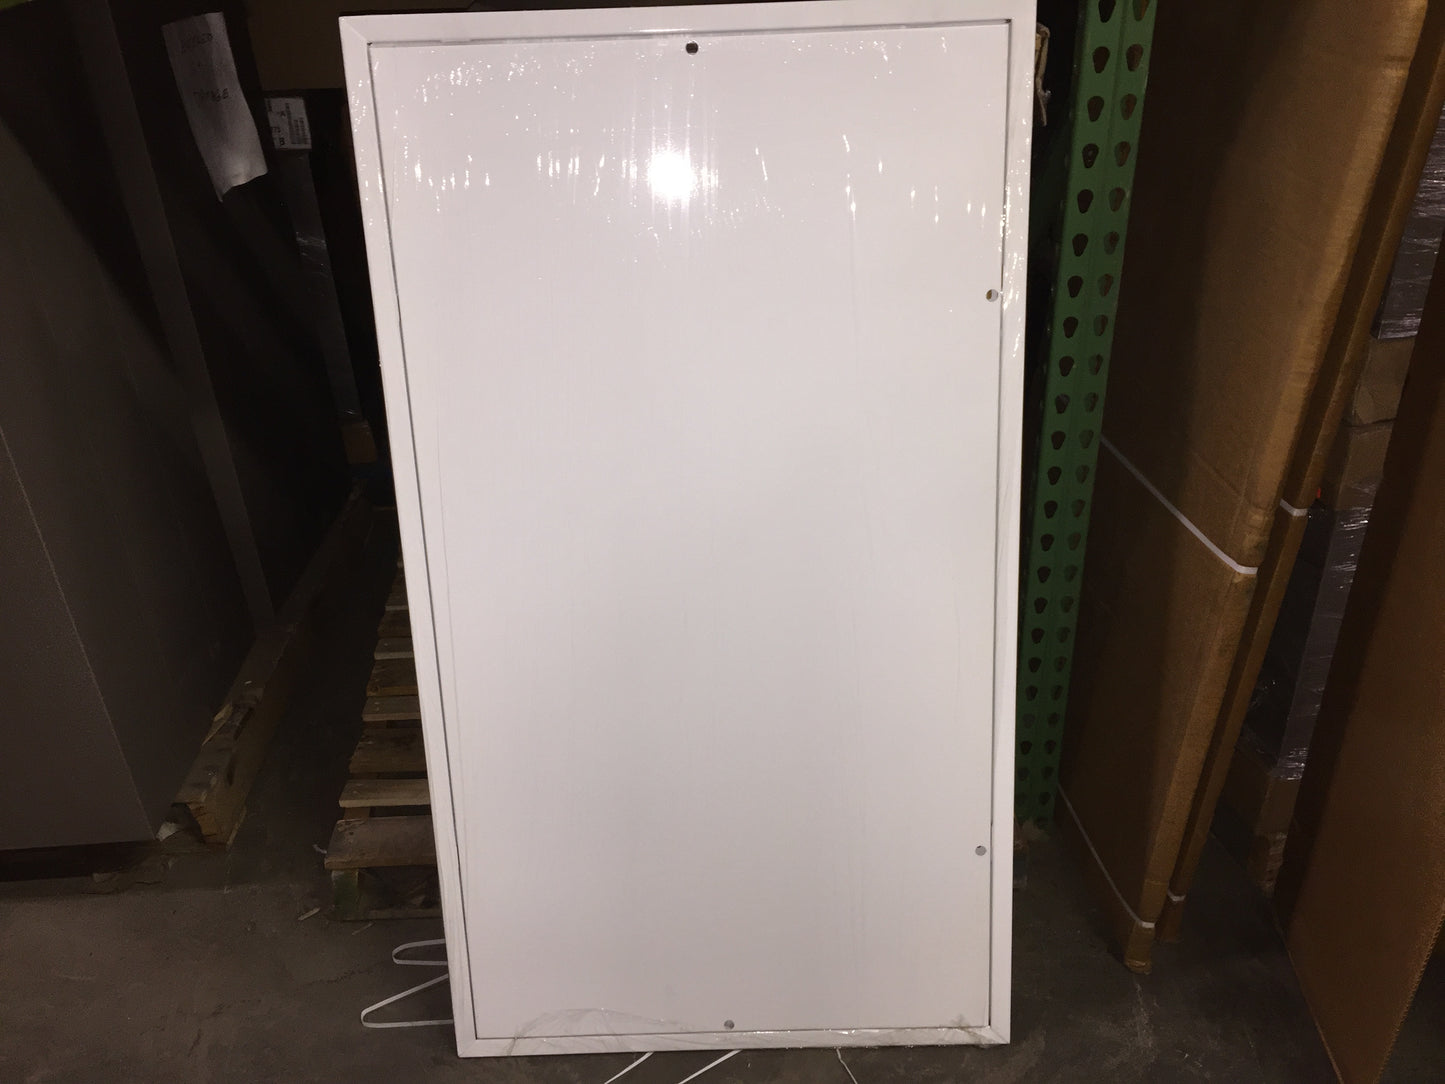 SOLID ACCESS PANEL FOR ALLSTYLE AHF12-30, AHL12-30, HFD30 MODEL AIR HANDLERS